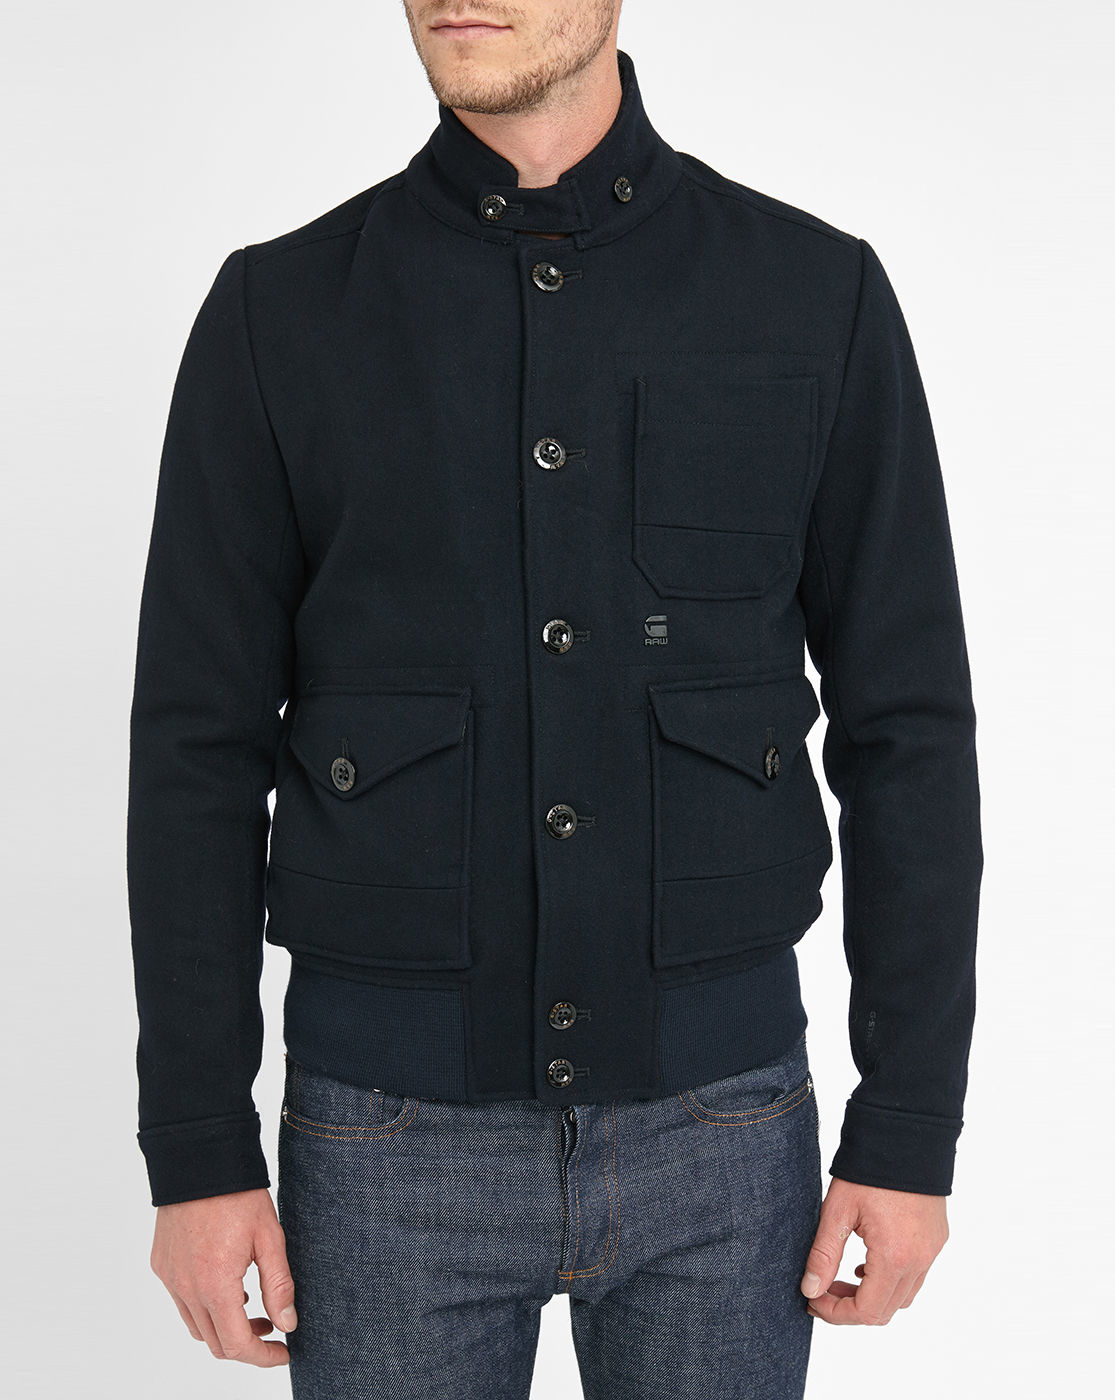 G-star raw Navy Varsity-style Rivo Wool Bomber Jacket With Patch ...